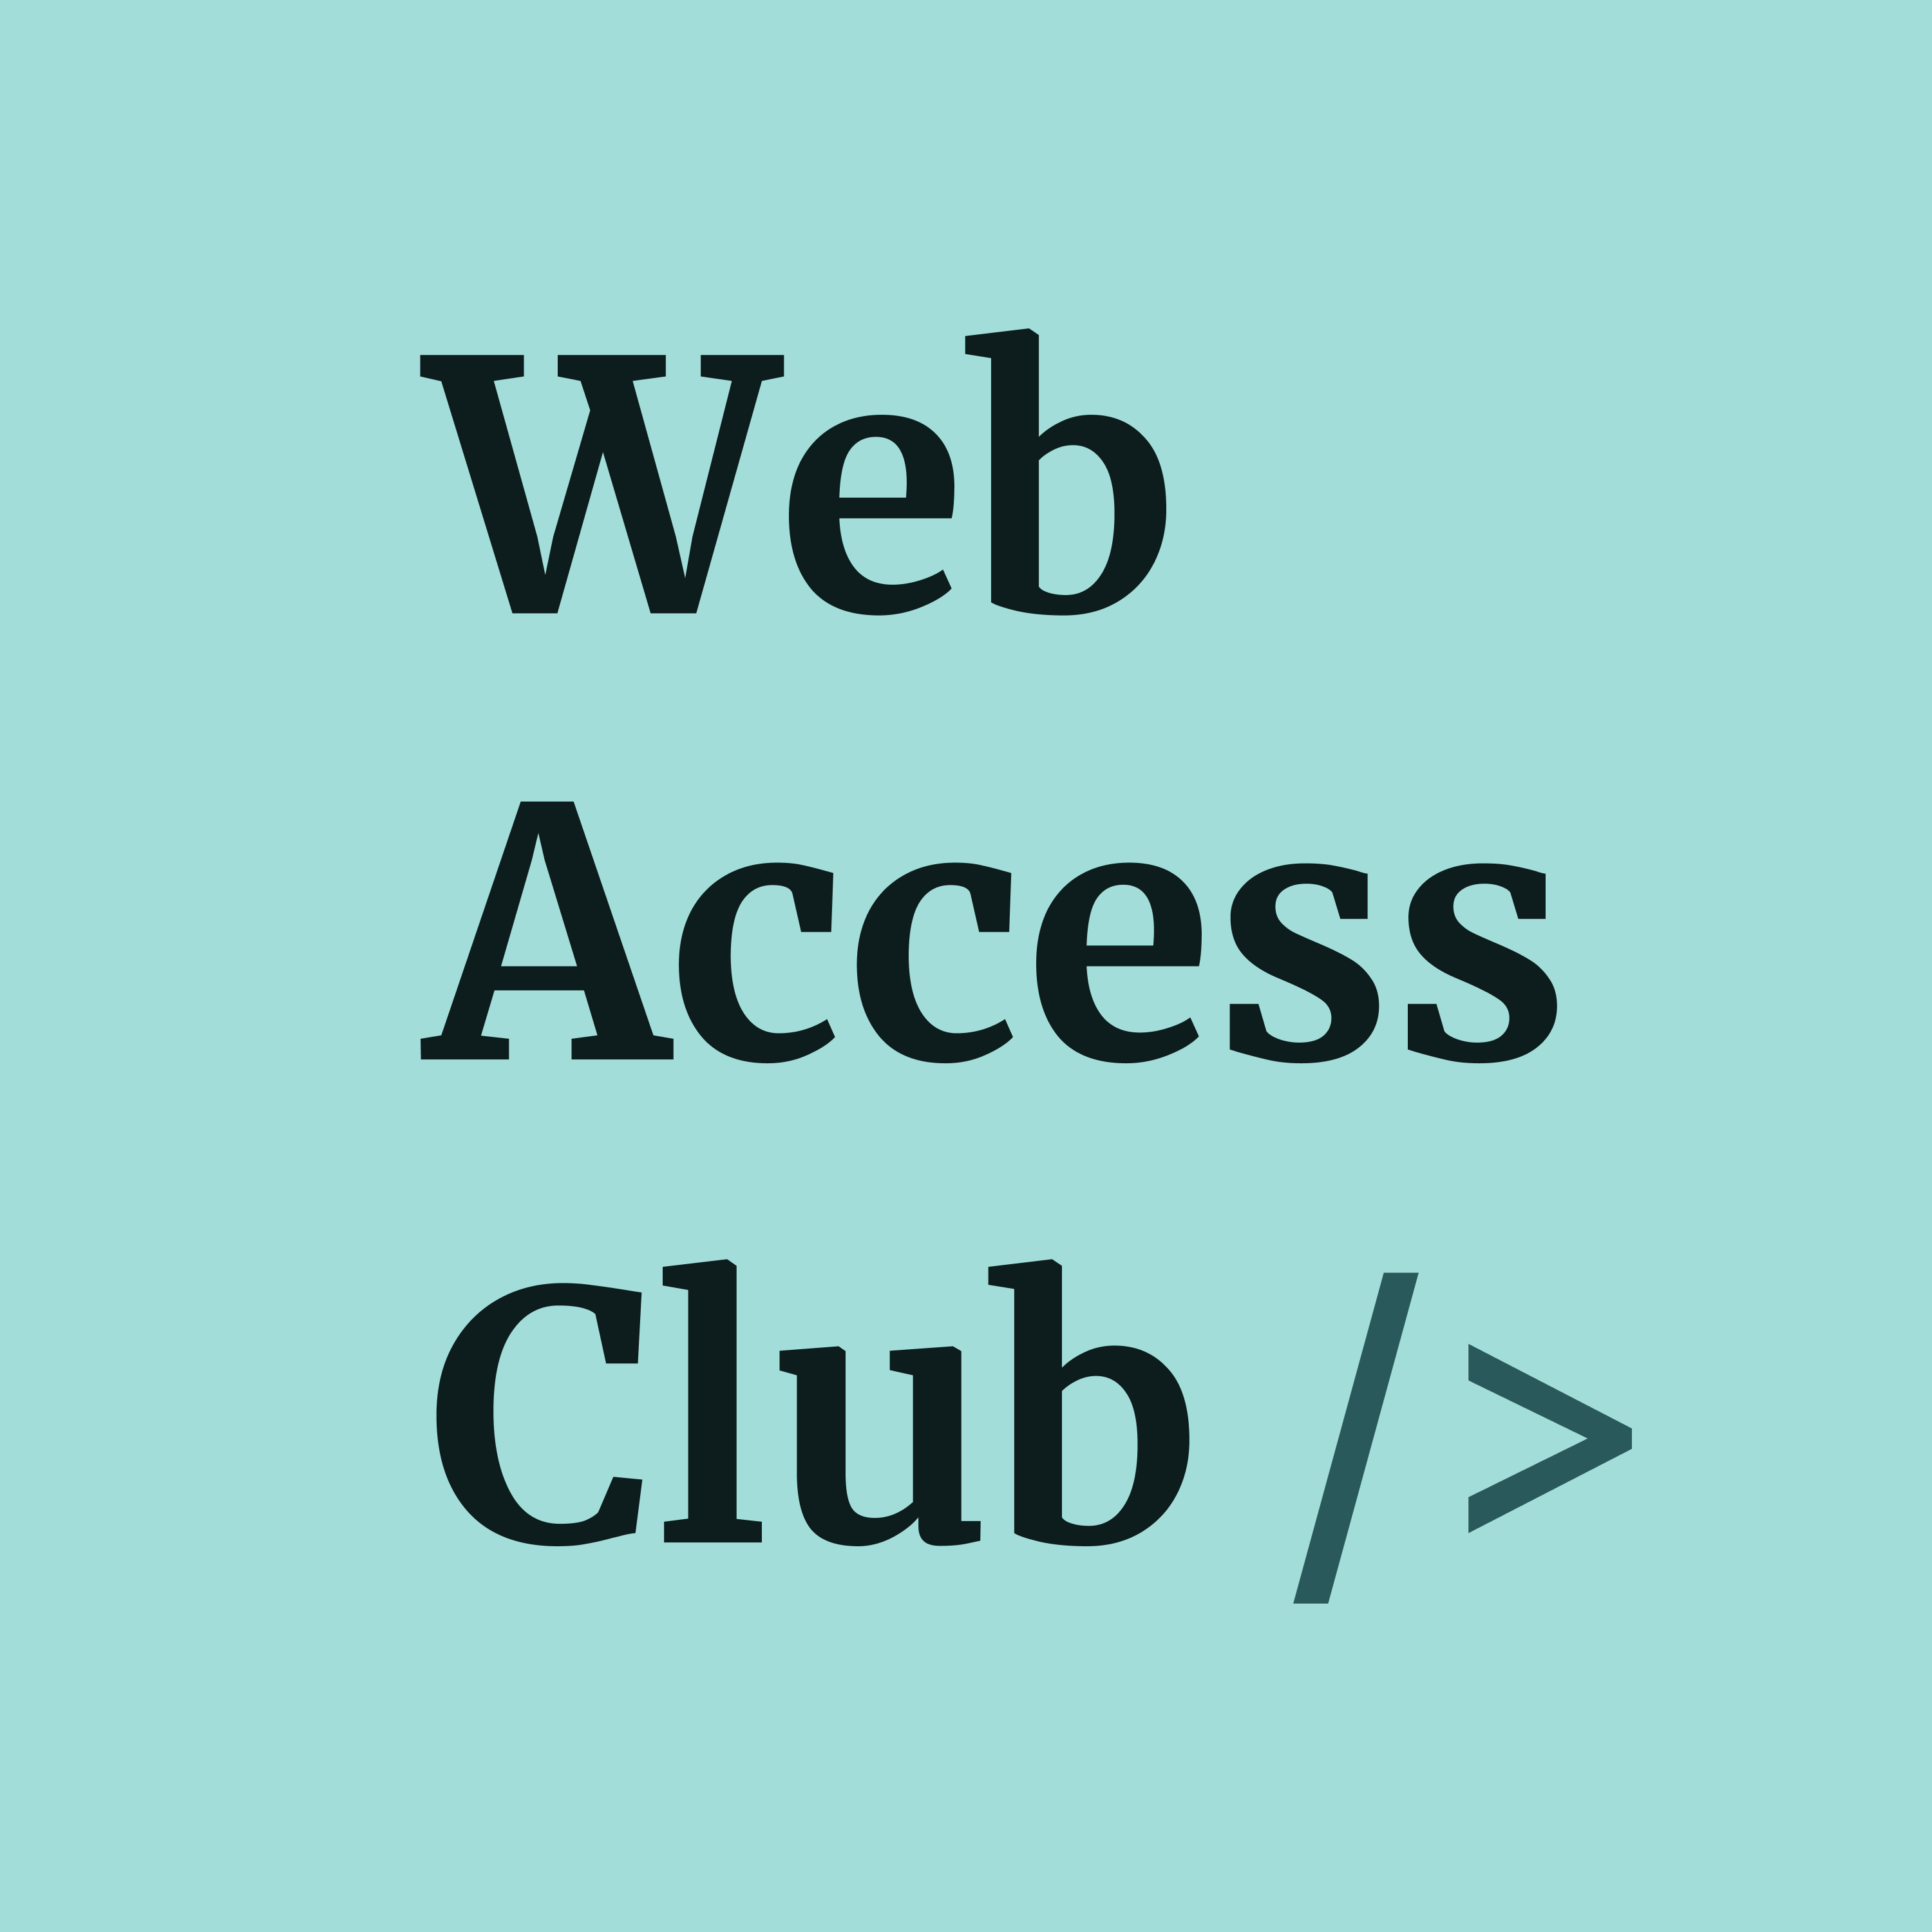 Welcome to Web Access Club!